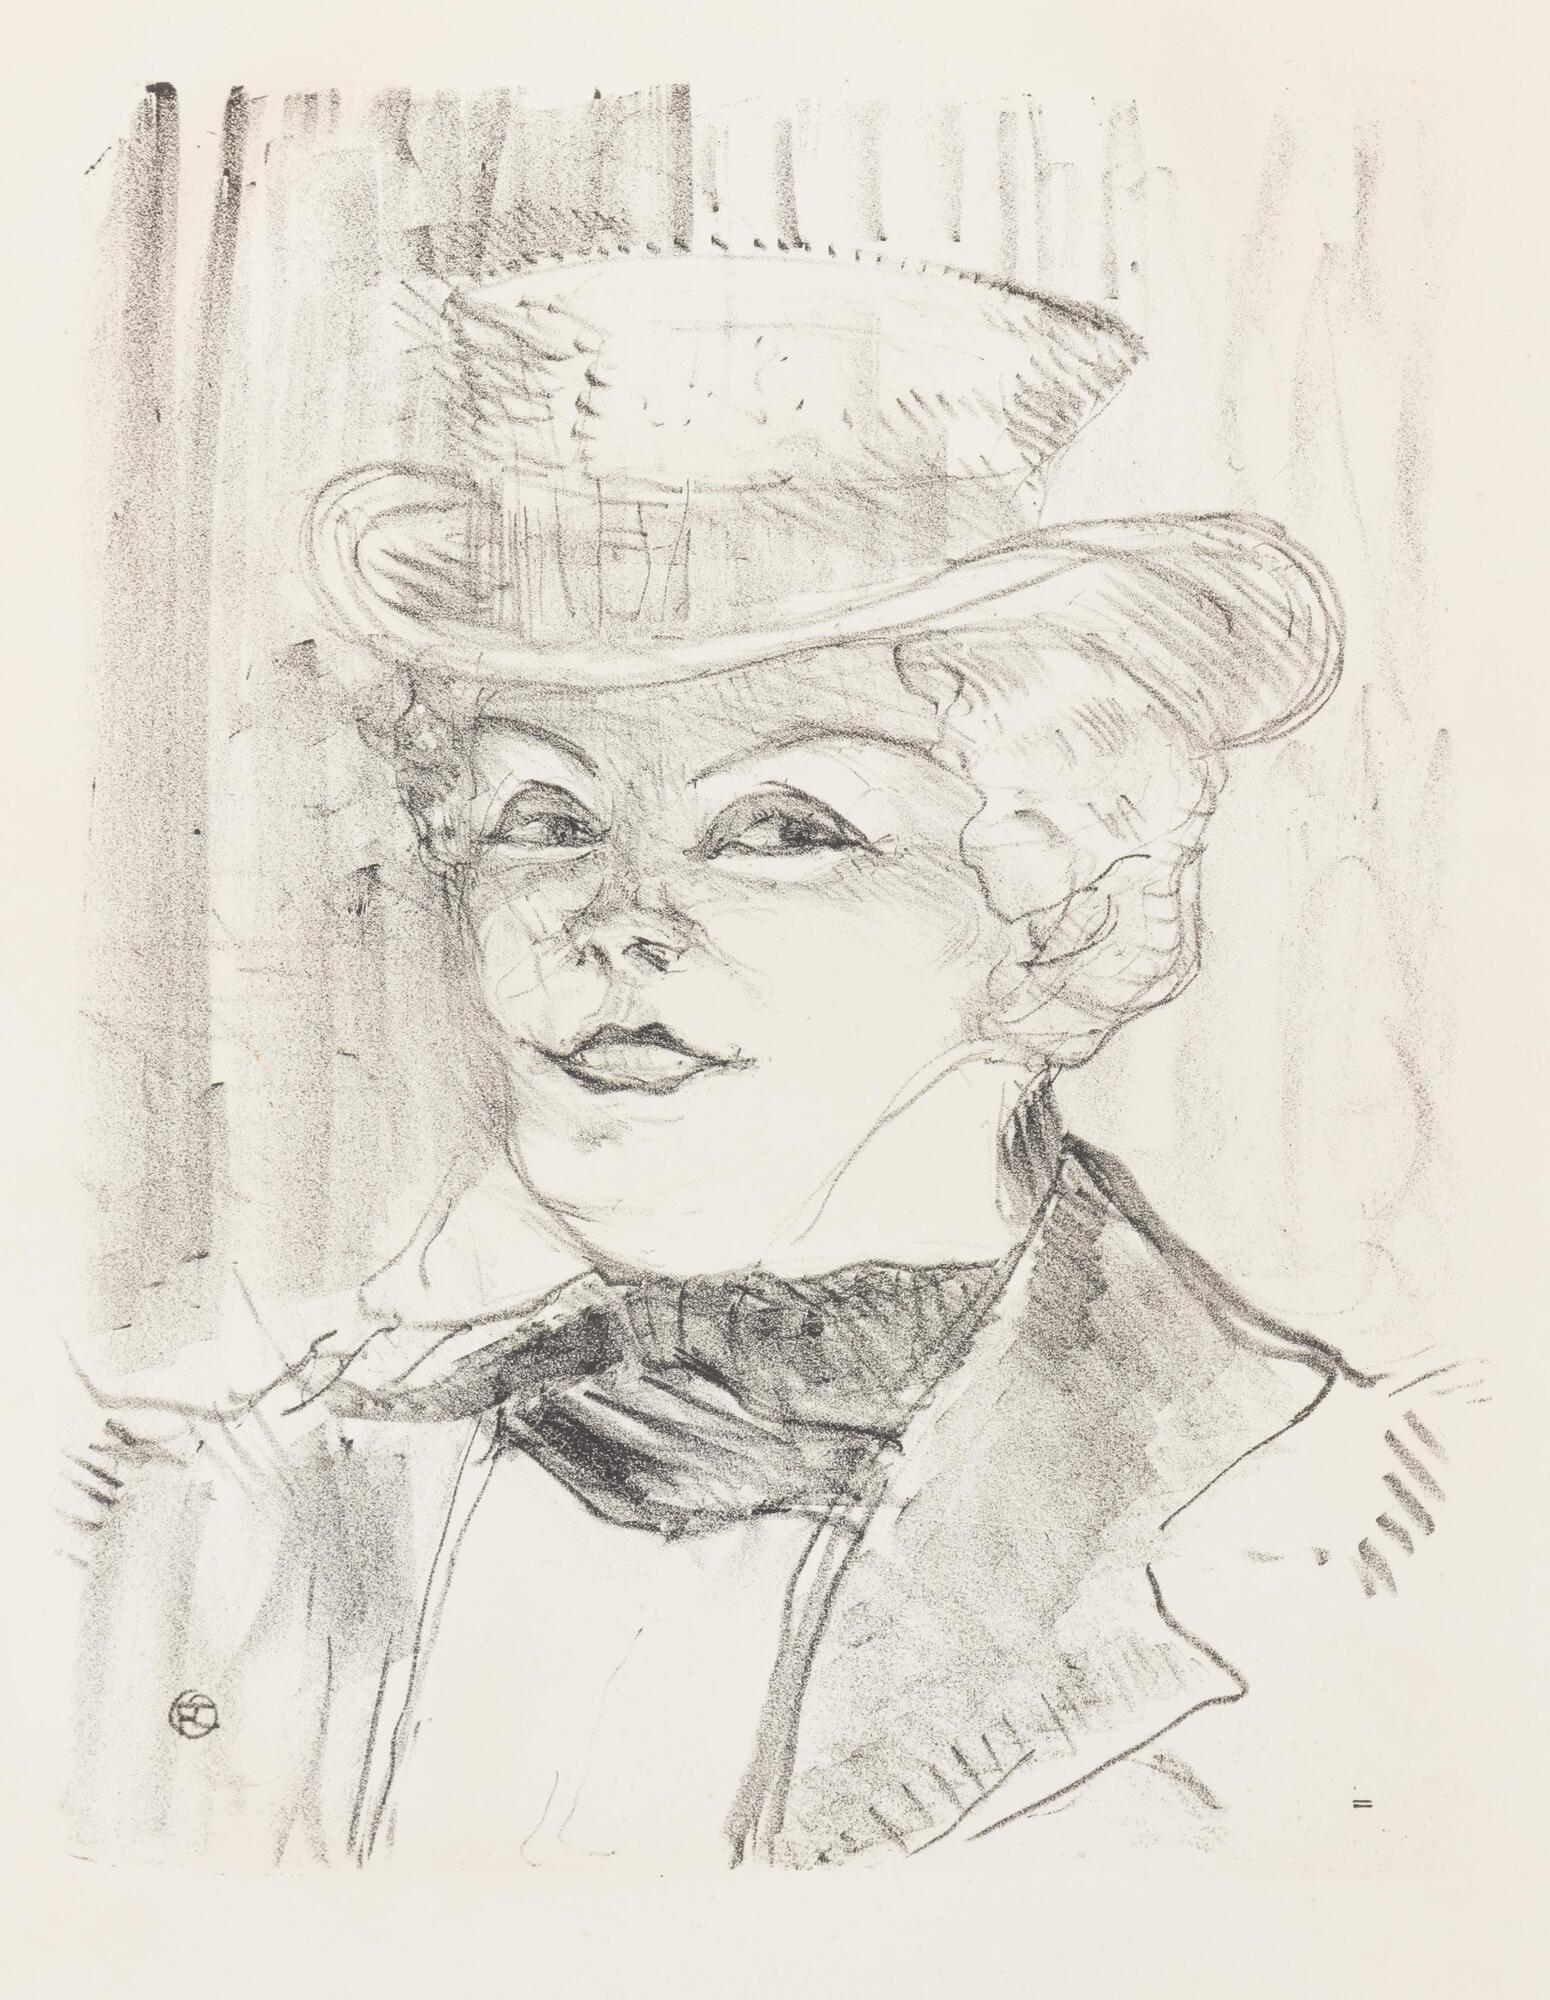 Portrait of a woman wearing men's clothing with a top hat, scarf around her neck and a suit jacket.